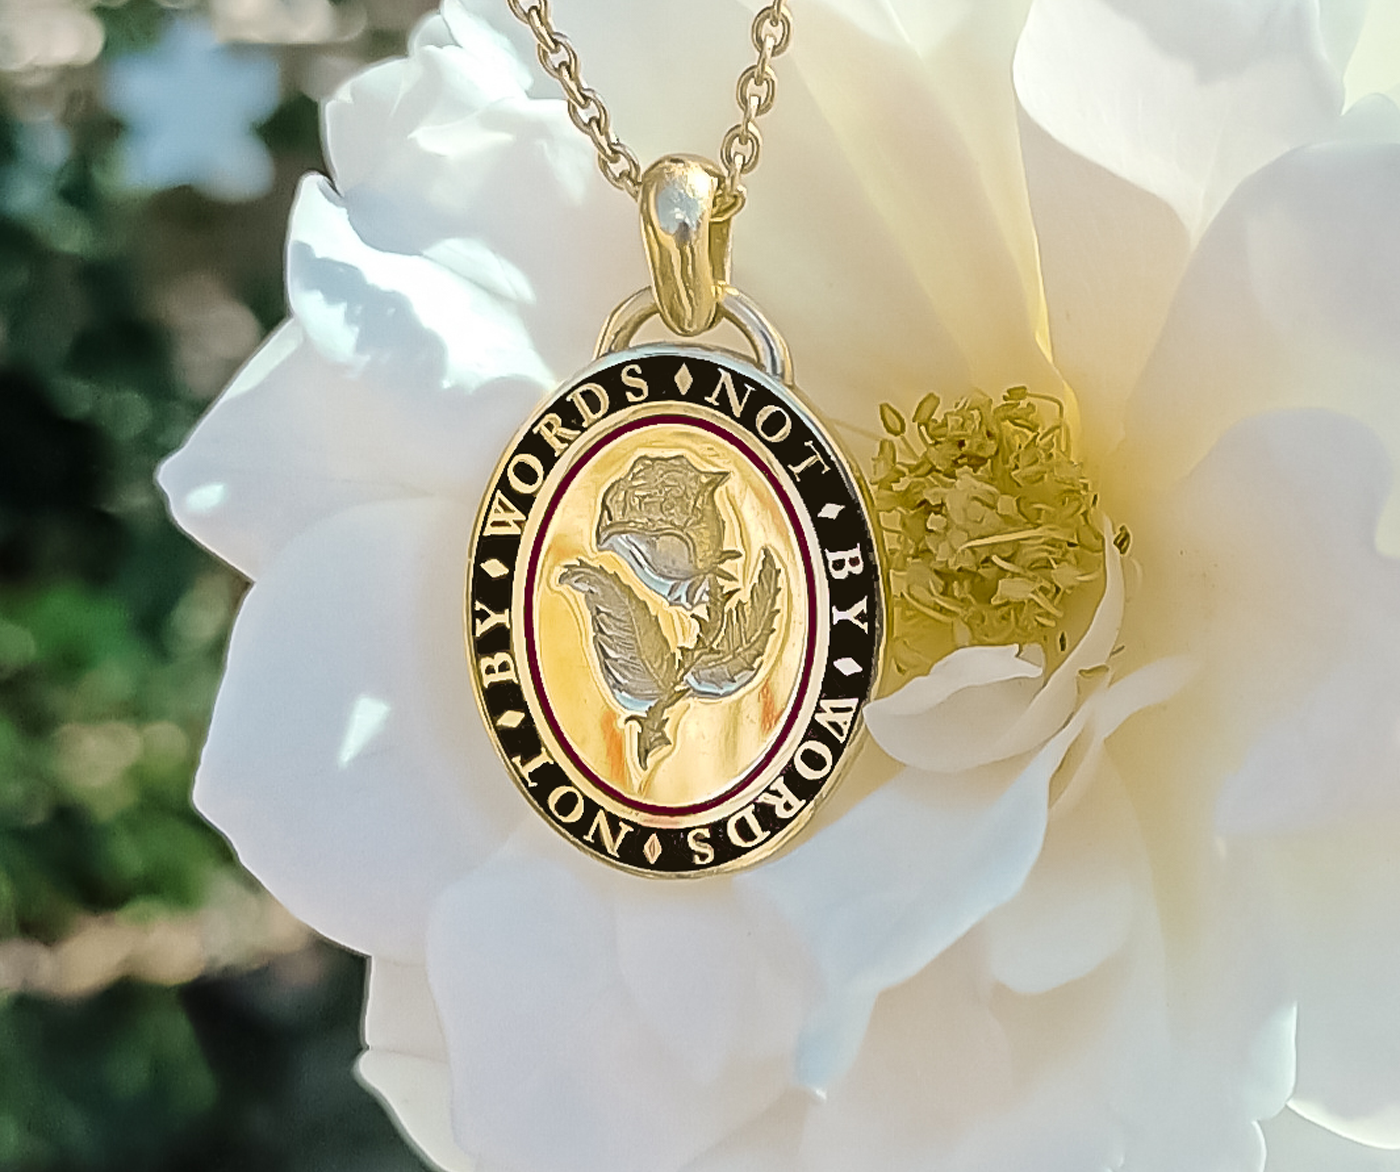 Bespoke Rebus hand engraved memento mori pendant necklace in 18ct yellow gold with black and red enamel